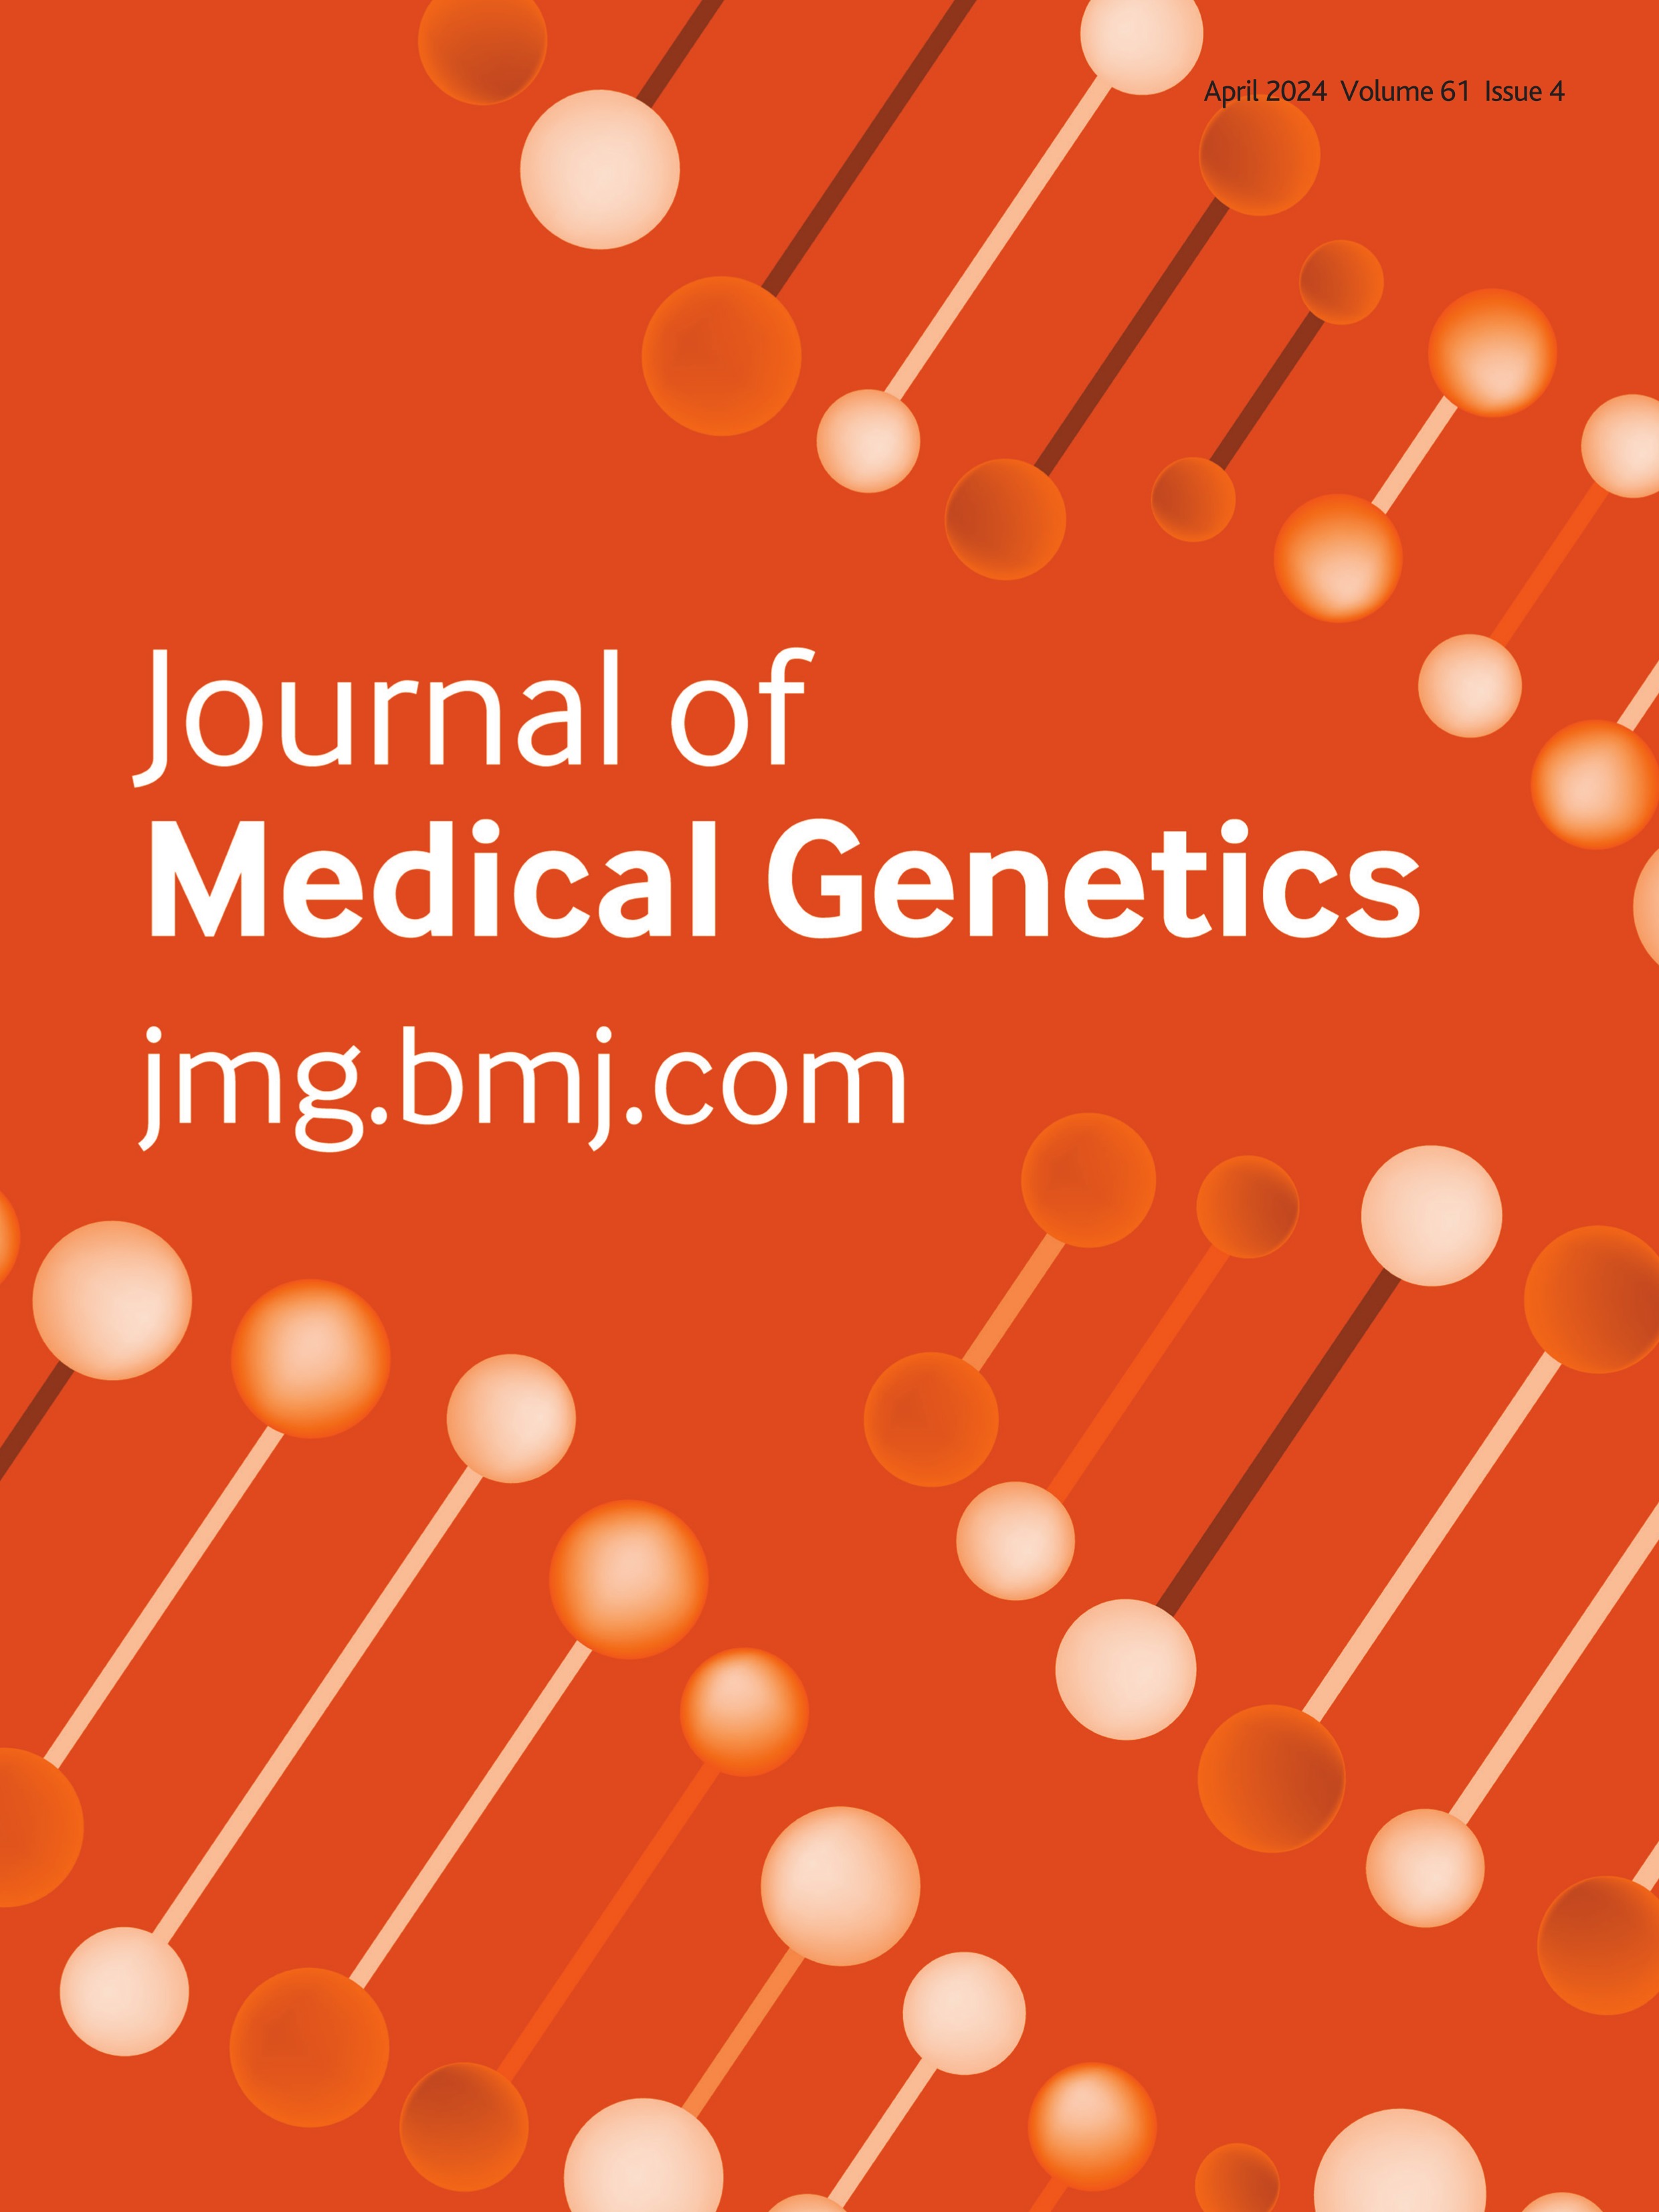 Clinical phenotype of FOXP1 syndrome: parent-reported medical signs and symptoms in 40 individuals